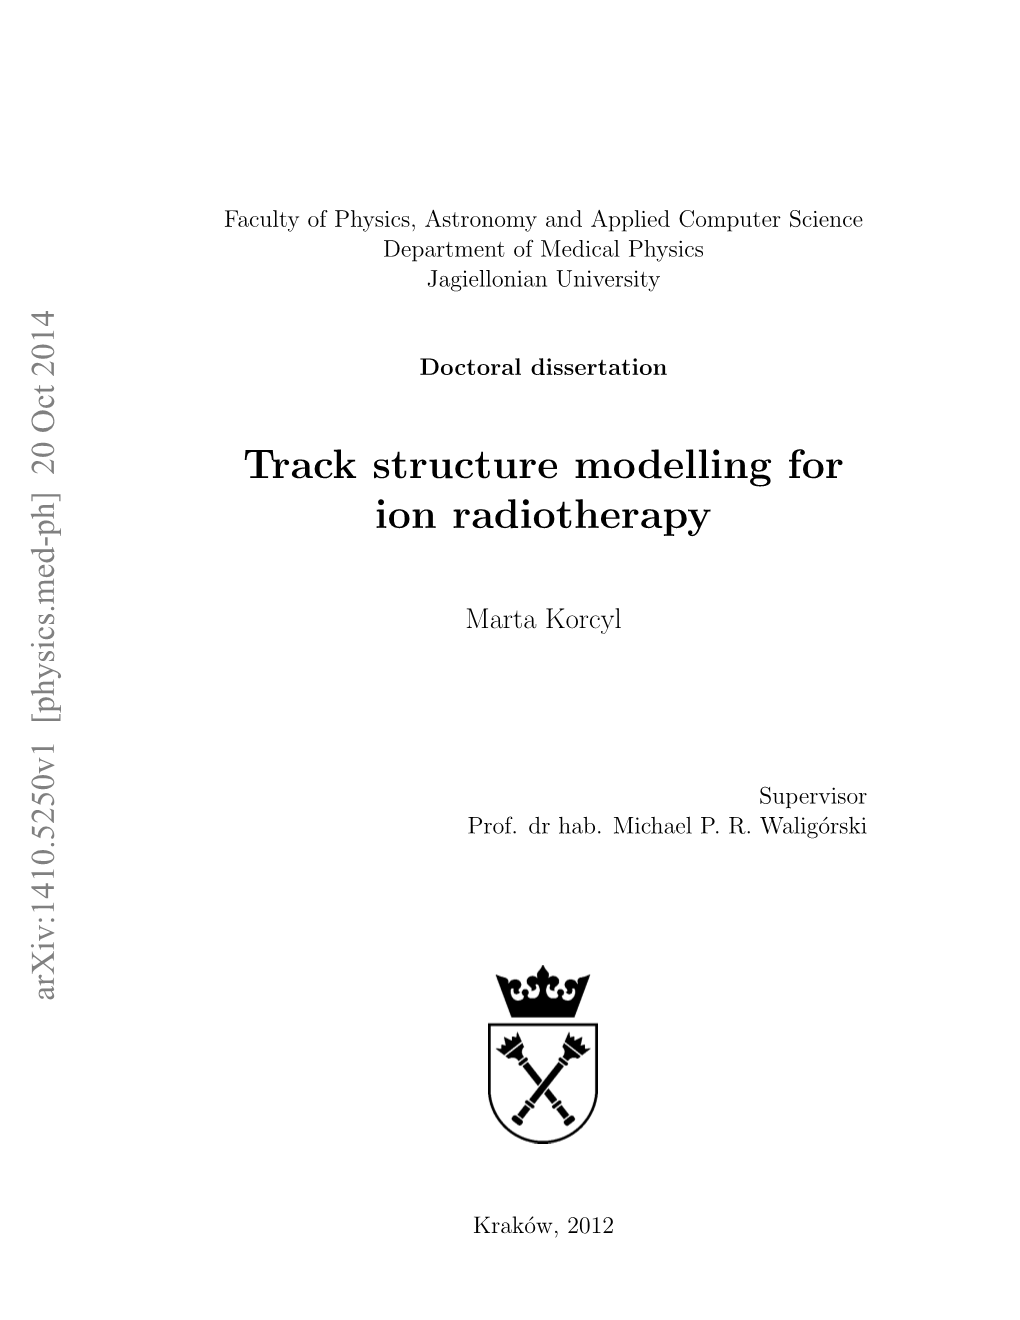 Track Structure Modelling for Ion Radiotherapy